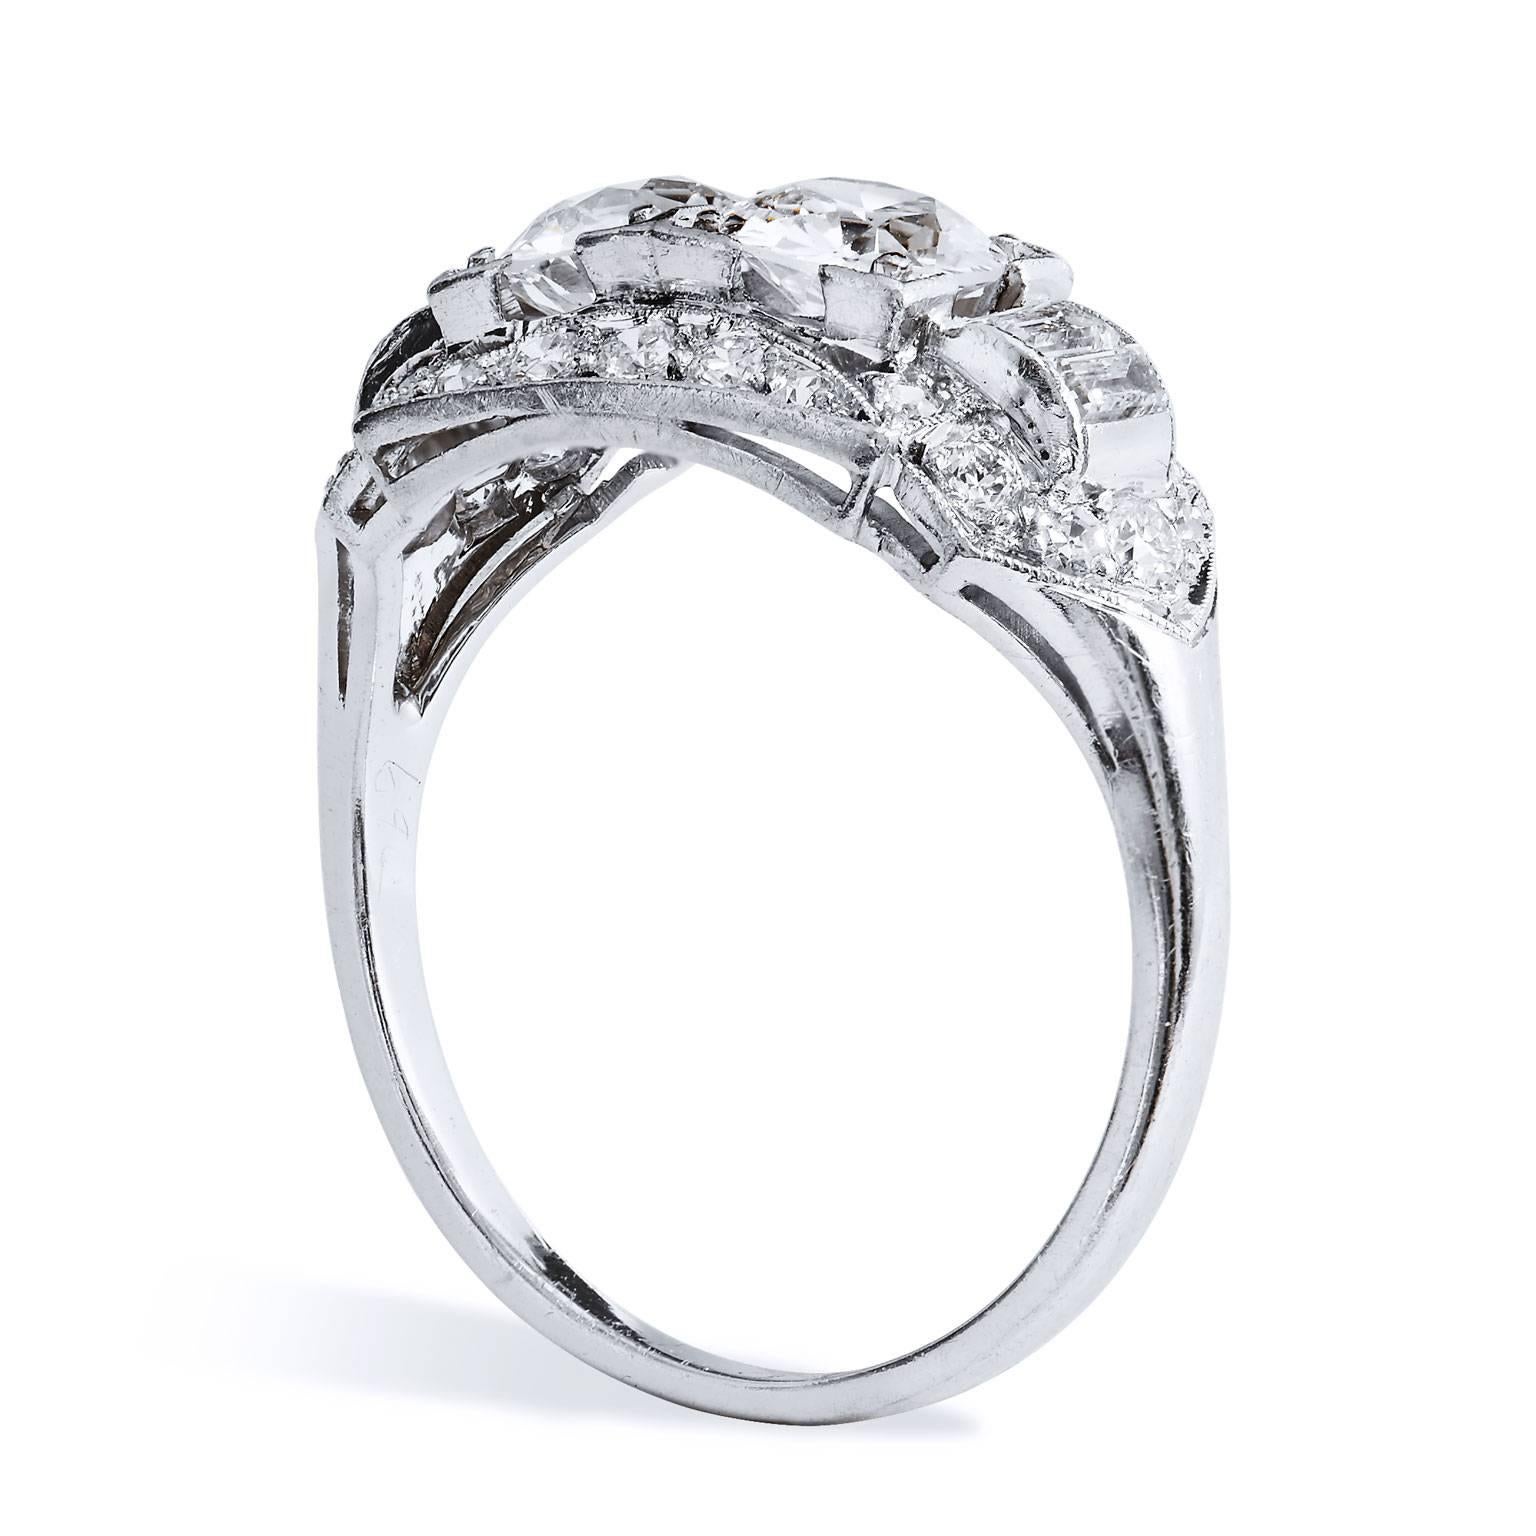 An engagement ring that stirs a sense revelry. This previously loved, ornate Art Deco platinum engagement ring features two Old European cut diamonds at center with a total weight of 1.10 carat (F/G/VS2). Four straight baguettes are prong set in a